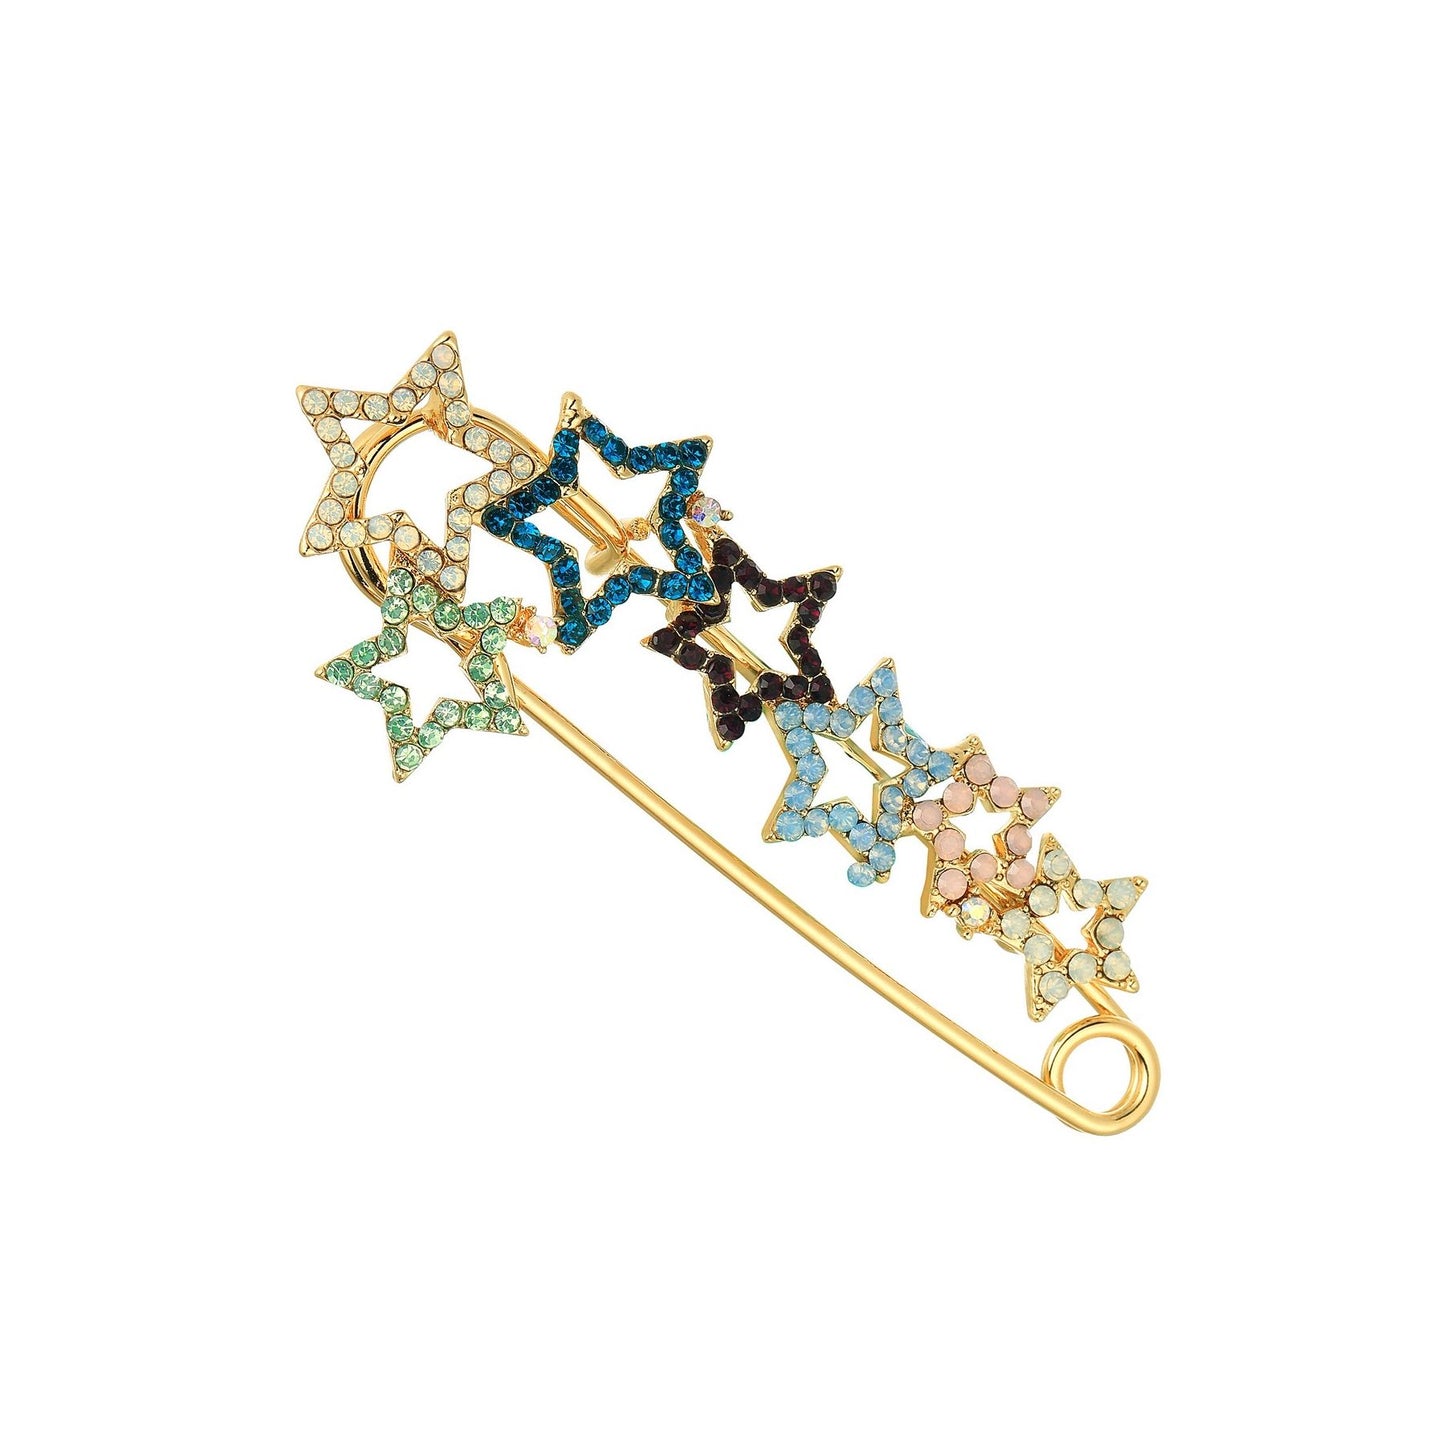 Shooting Star - Multi Coloured Star Safety Pin Brooch from Frinkle